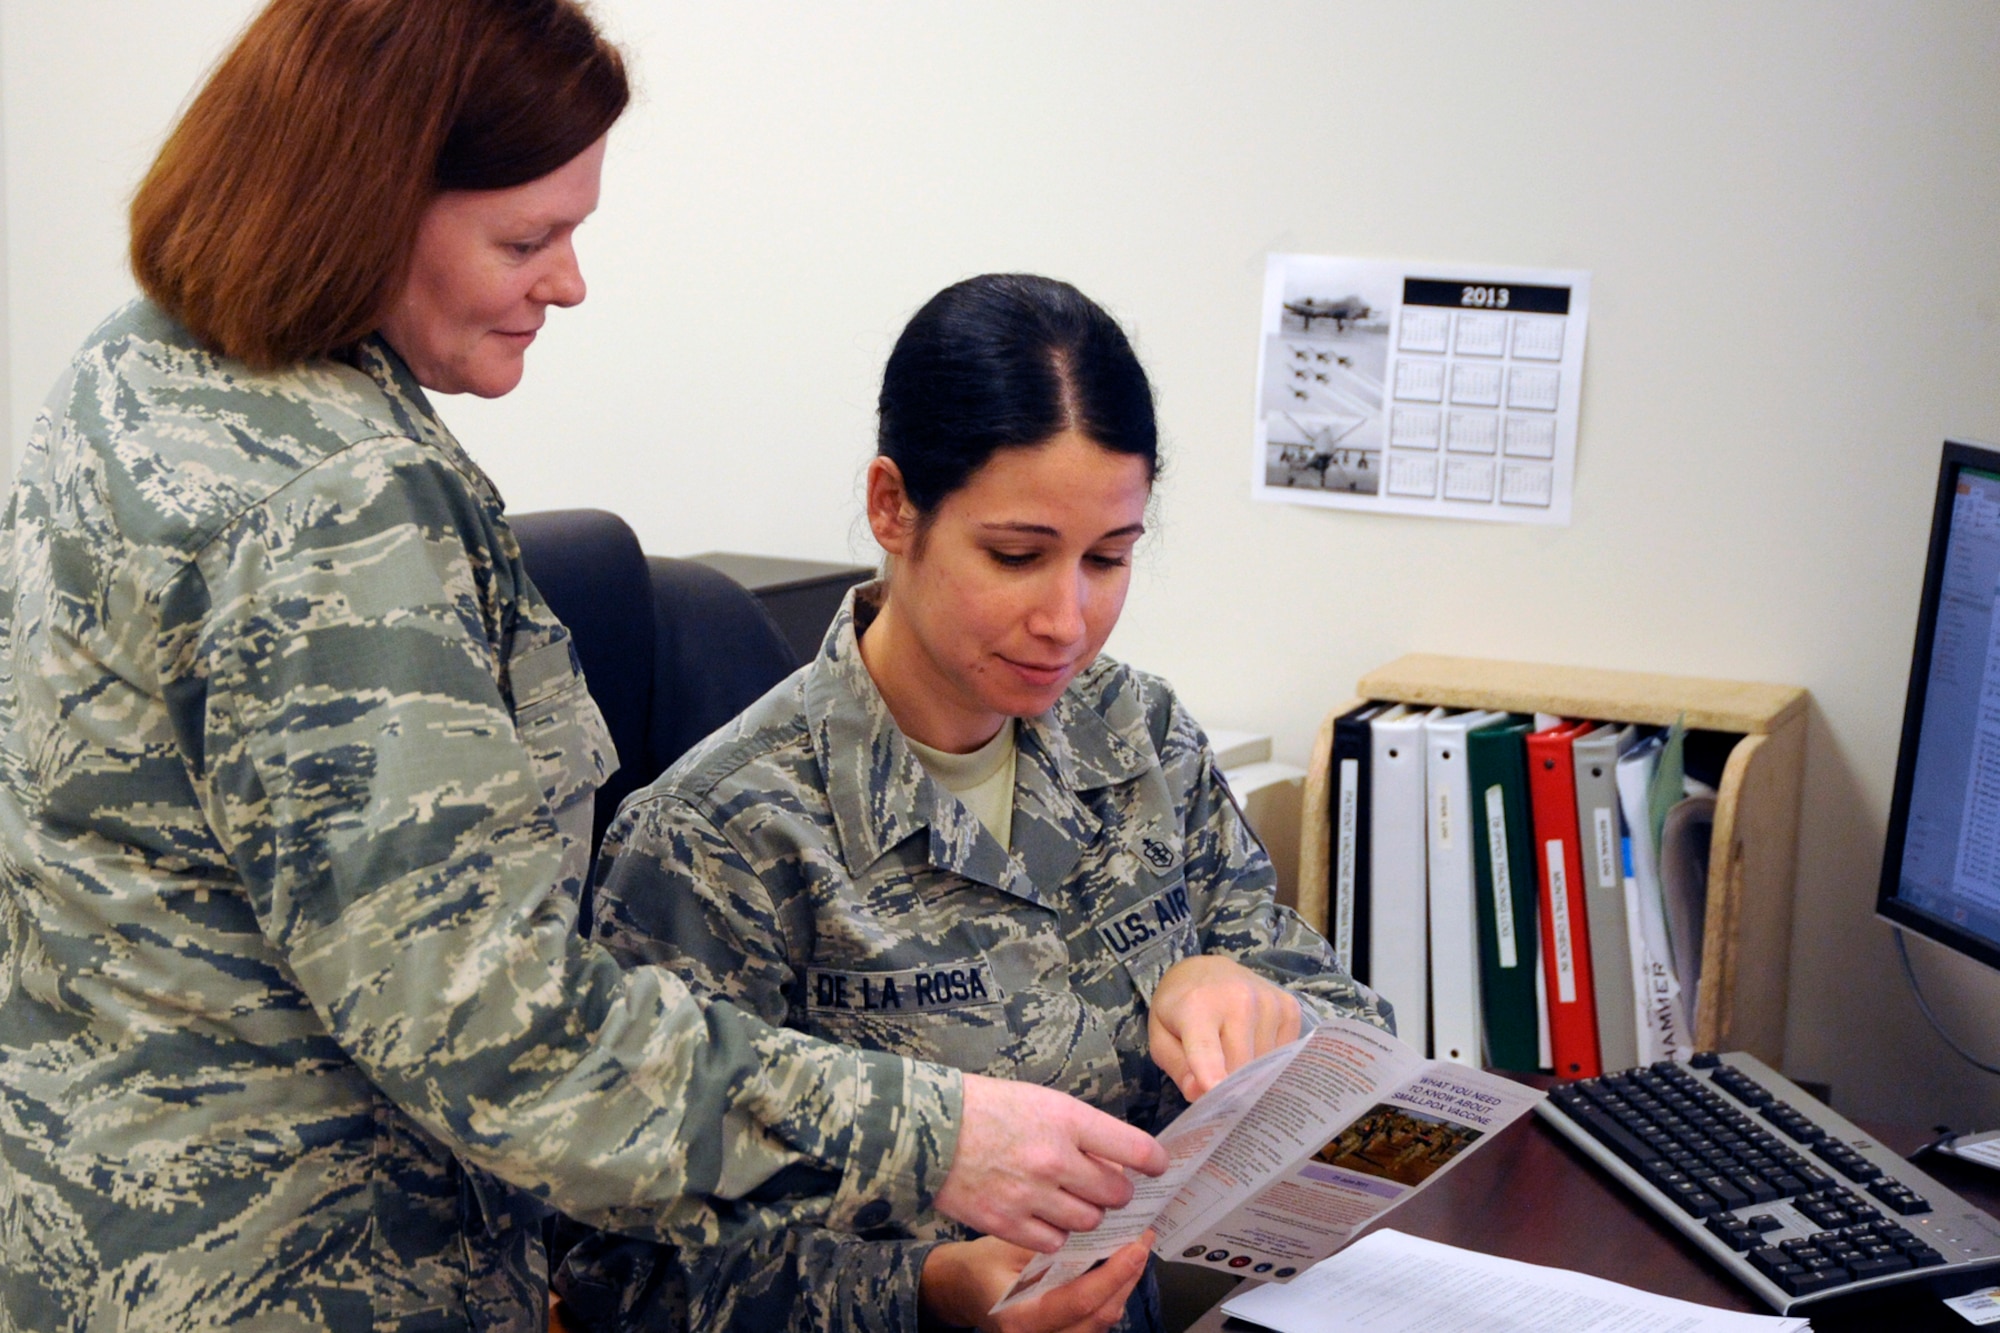 130725-Z-HC784-009 – Capt. Cheryl Bink and TSgt. Deeahna De La Rose, both members of the 127th Medical Group, review information on proper procedures to draw blood for medical testing purposes at Selfridge Air National Guard Base, July 25, 2013. The 127th Medical Group is charged with maintaining the medical readiness of nearly 1,700 Citizen-Airmen in the Michigan Air National Guard. (U.S. Air National Guard photo by John S. Swanson/Released)